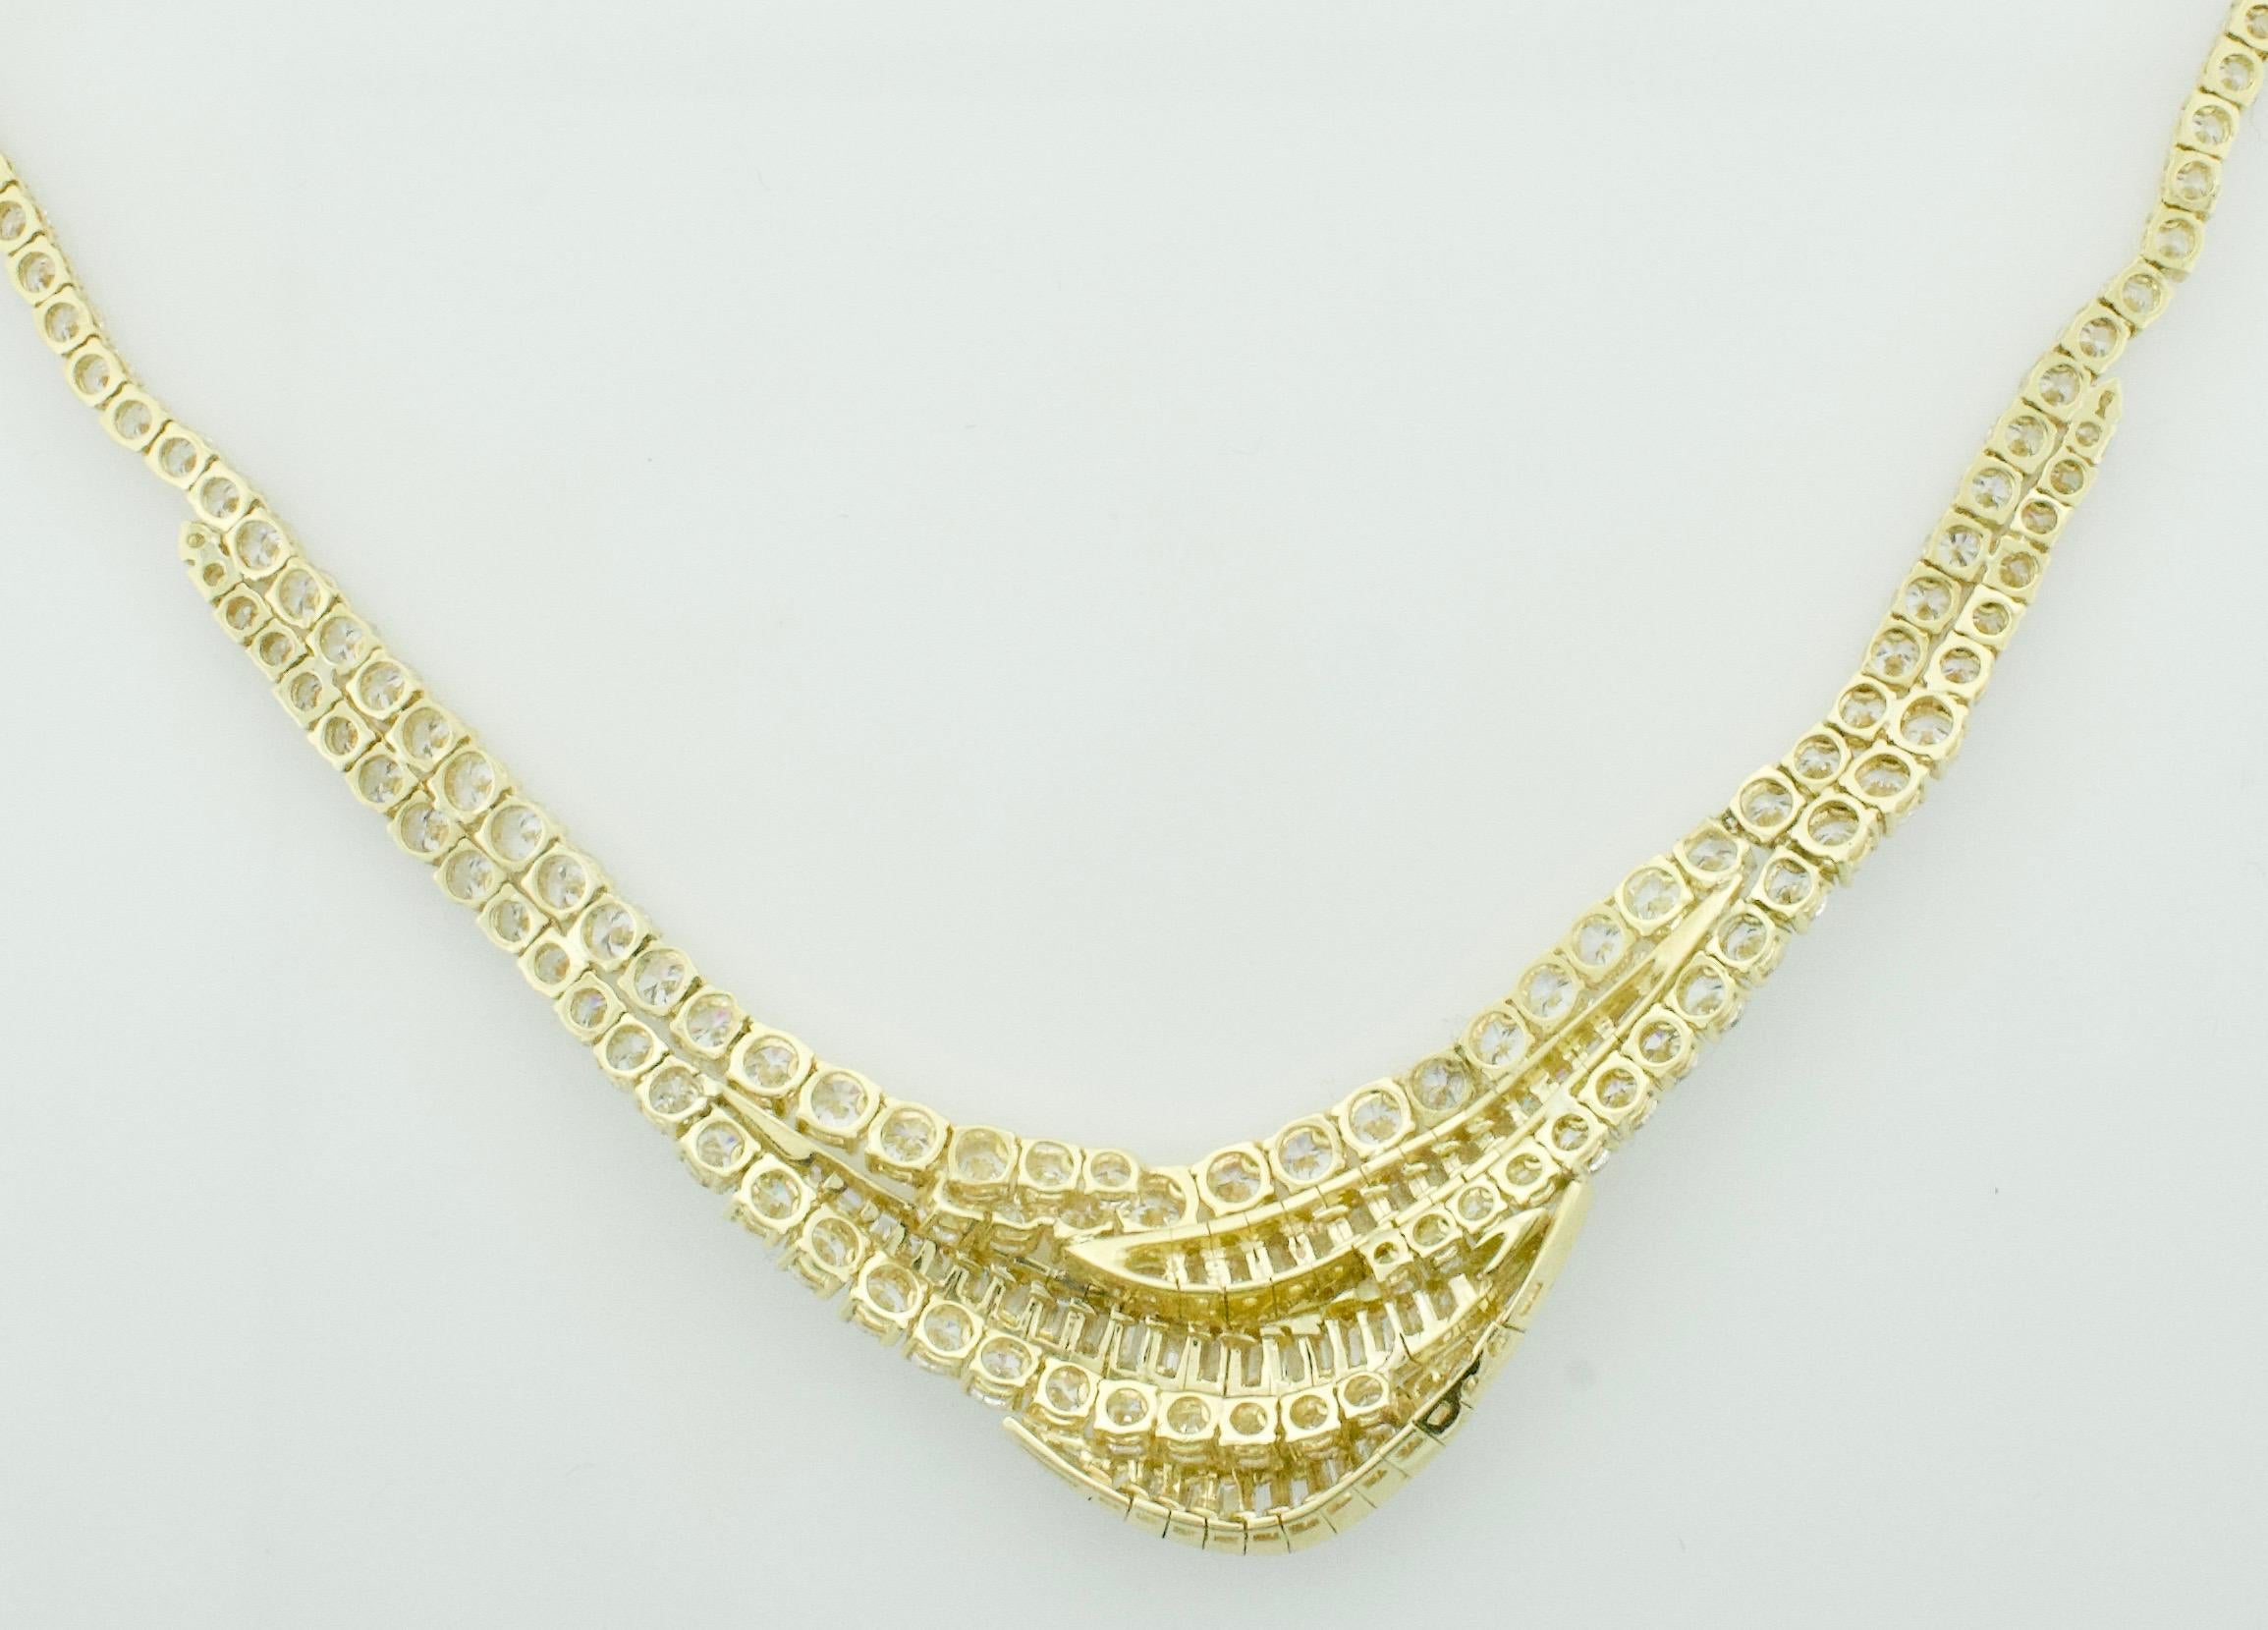 Baguette Cut Important Diamond Necklace in 18k 28.41 Carats Total Weight For Sale